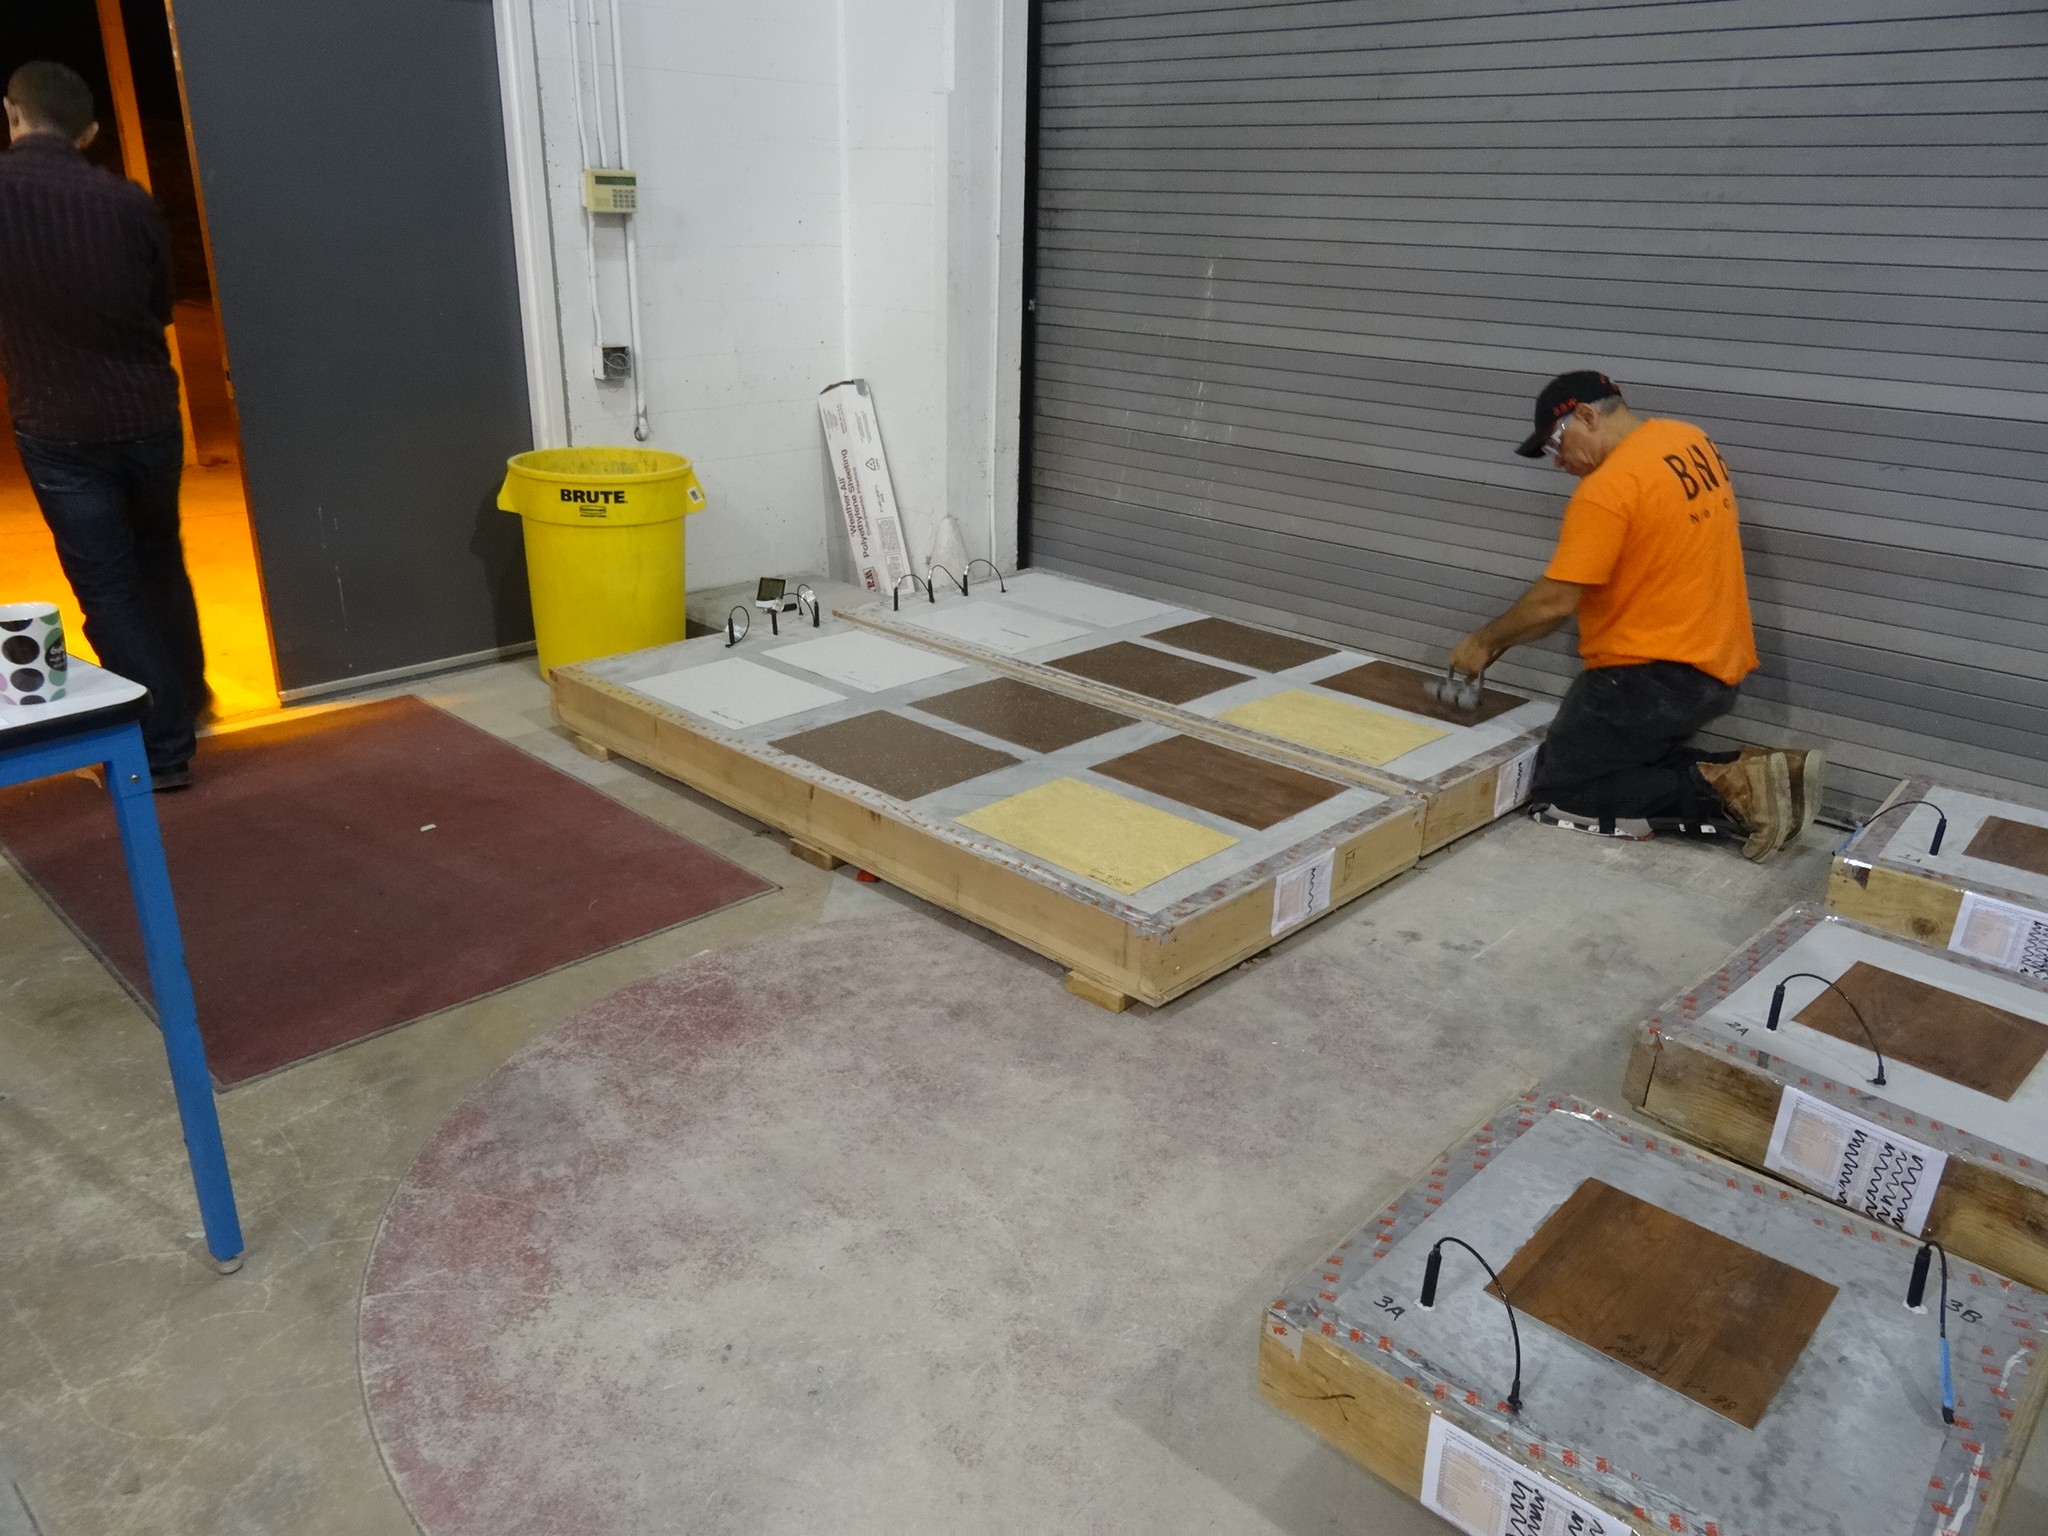 Concrete mix design testing for compatibility with different flooring/adhesive types